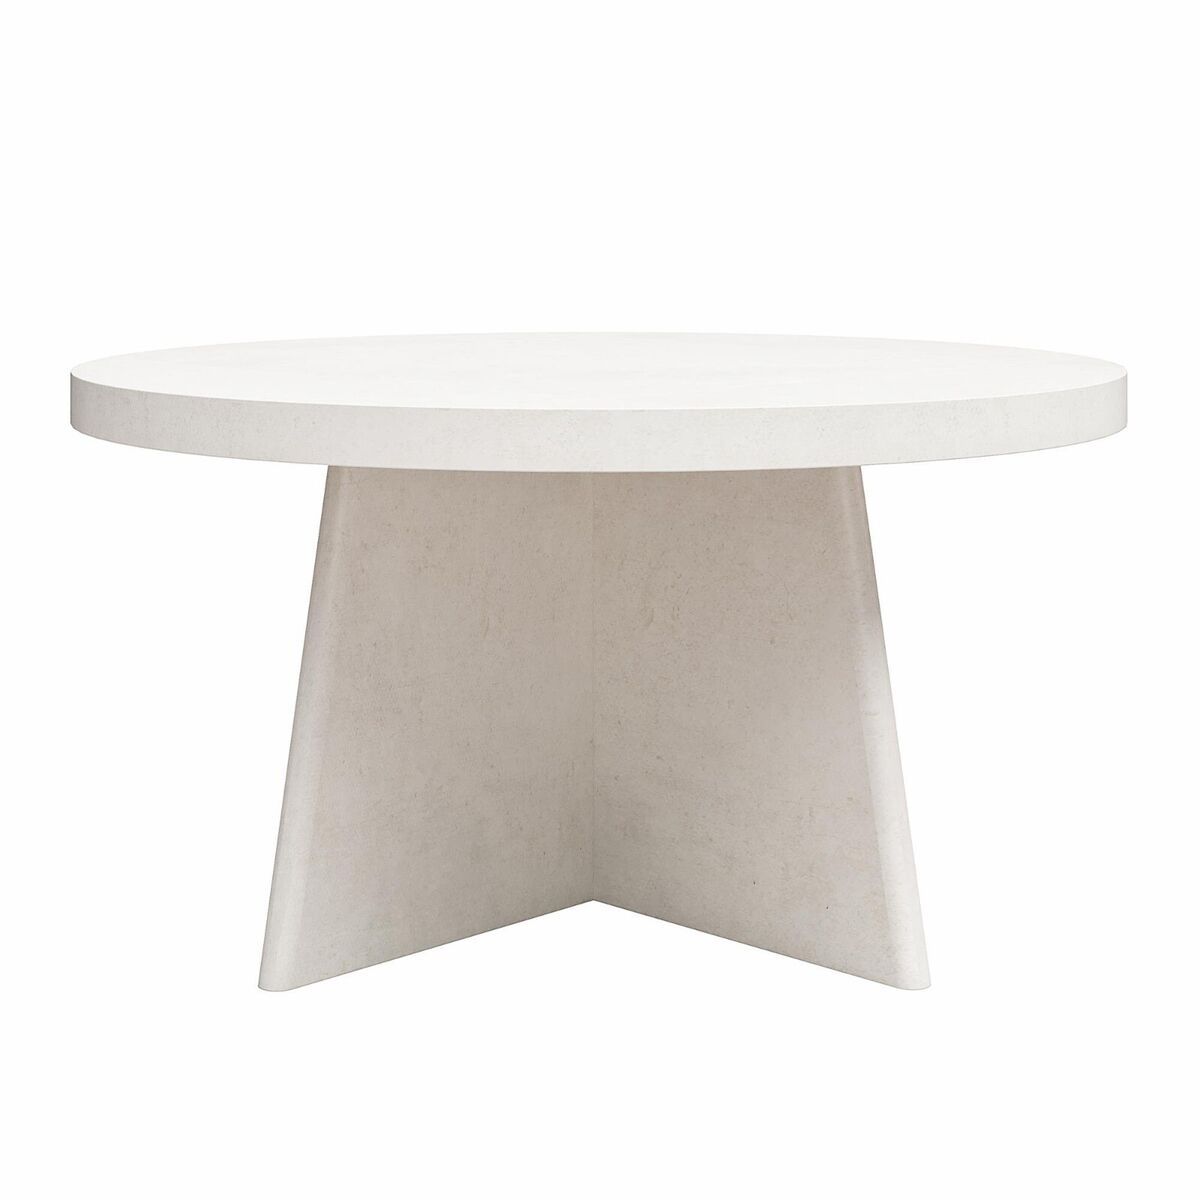 Liam Round Coffee Table, Plaster Intertwines Crisp Minimalism With Earthy  Warmth | Ebay Inside Liam Round Plaster Coffee Tables (View 4 of 15)